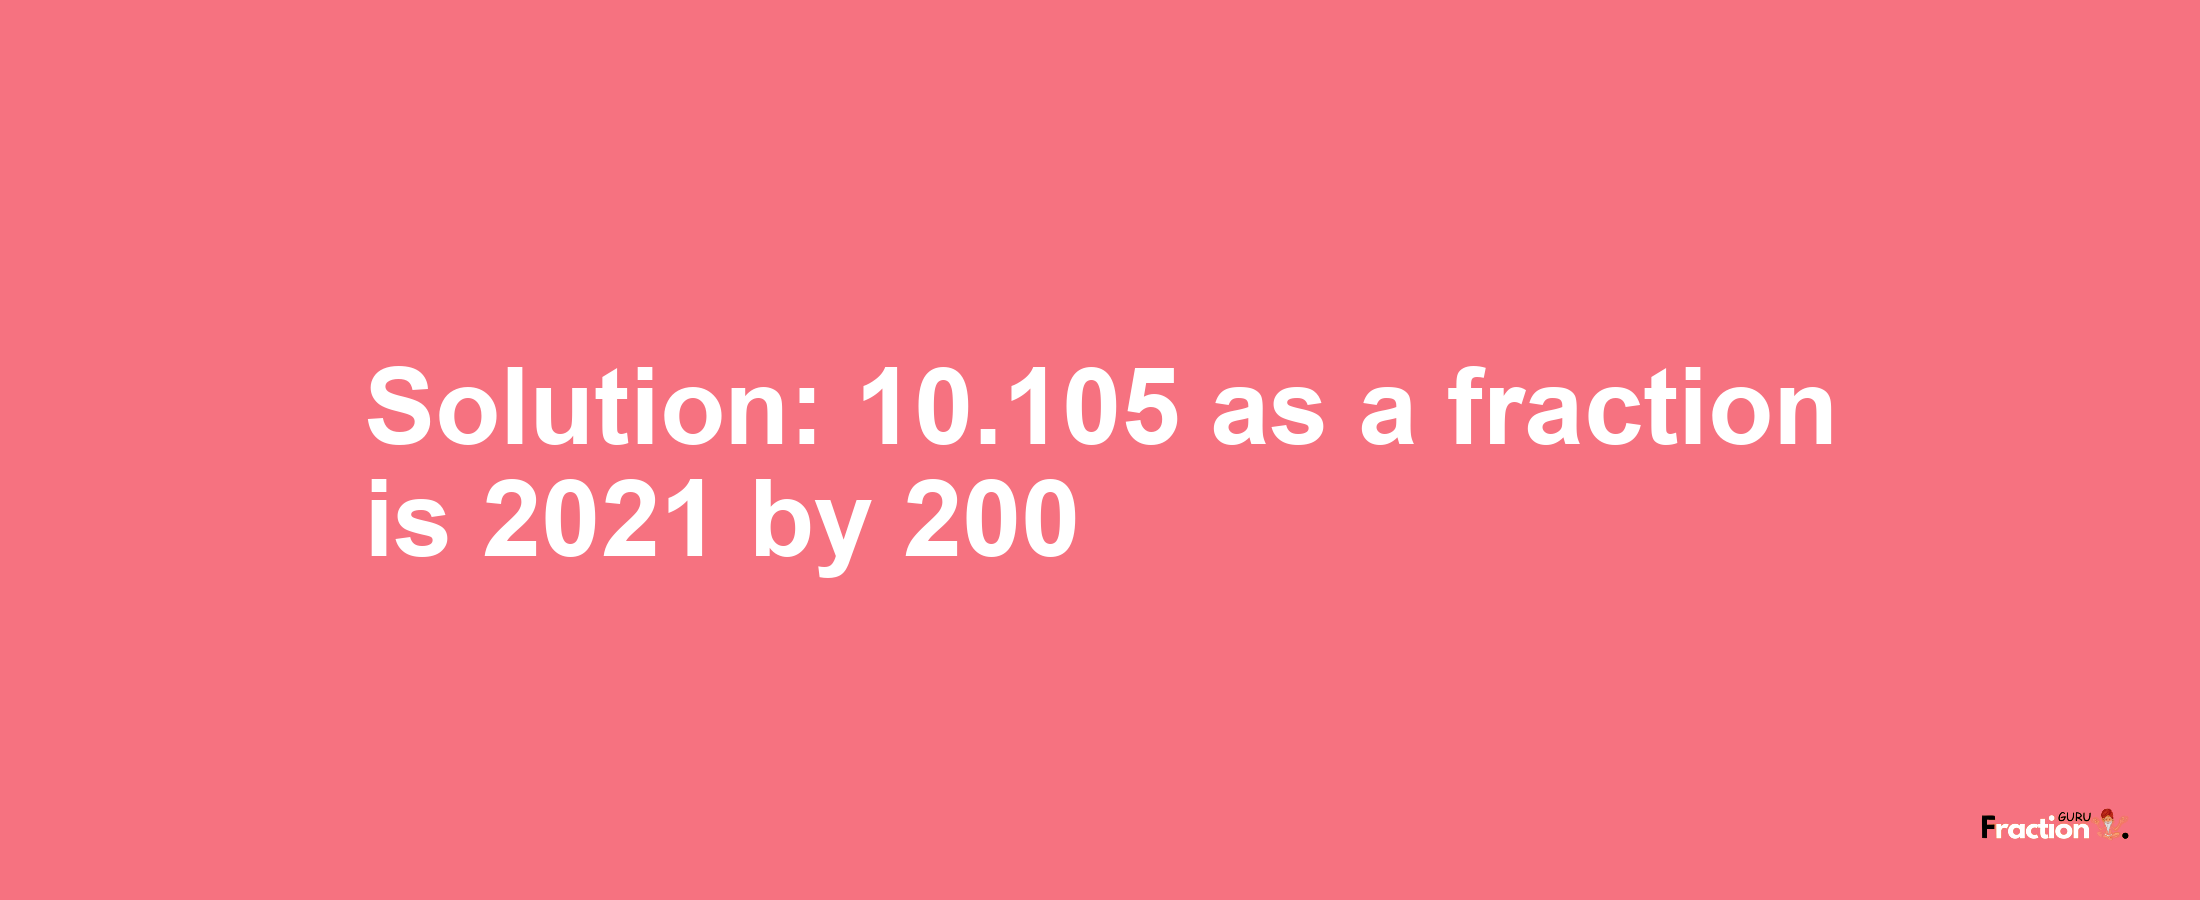 Solution:10.105 as a fraction is 2021/200